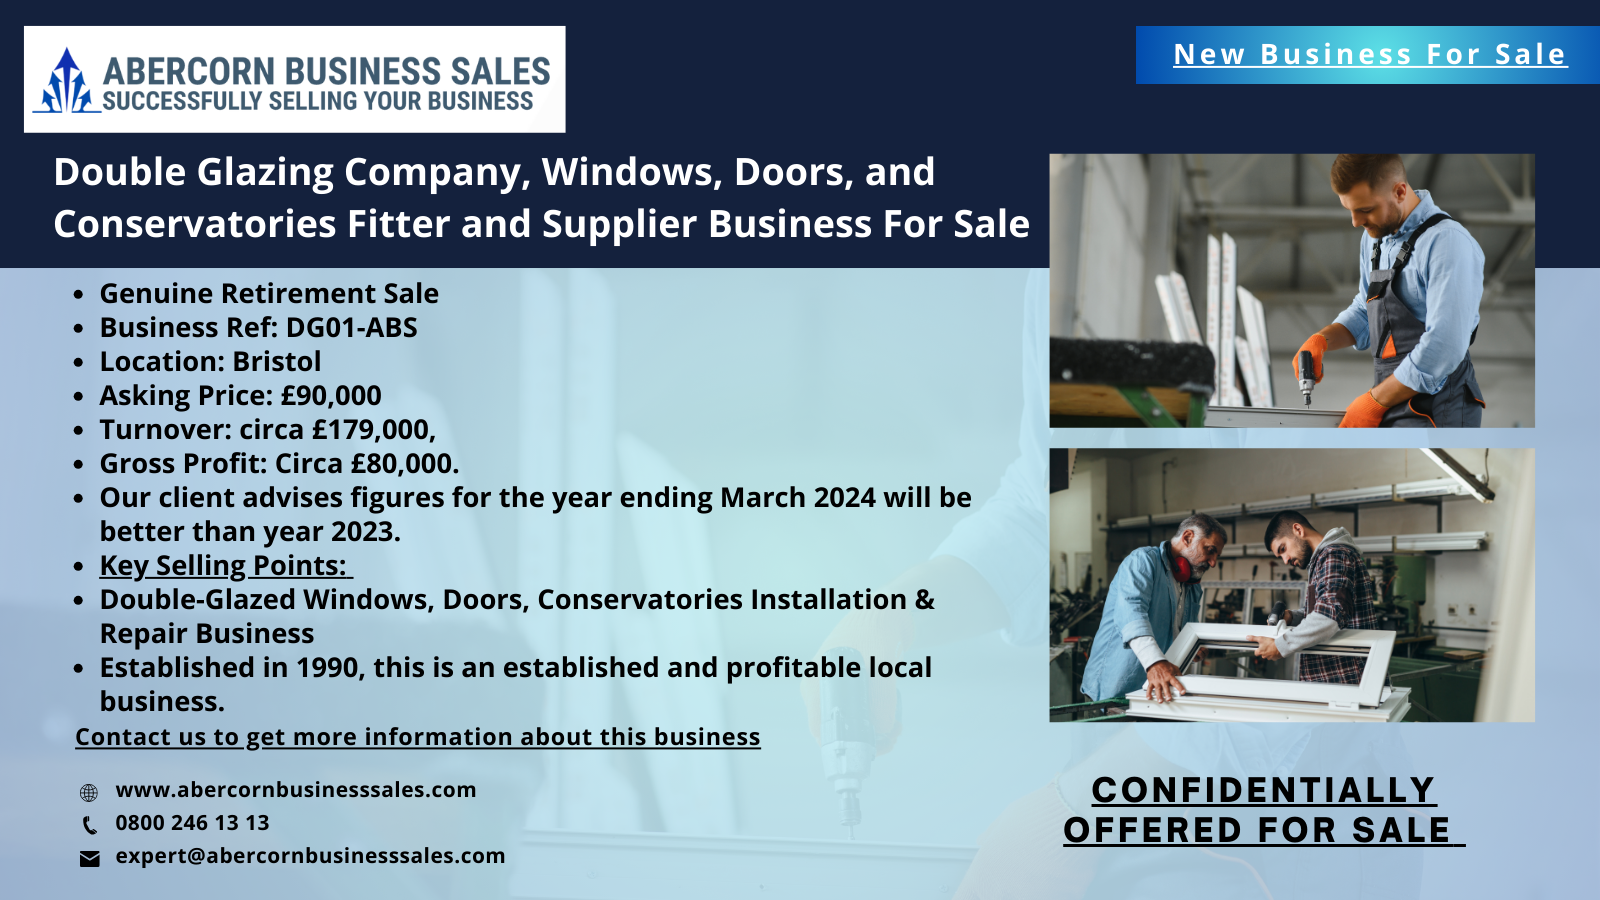 DG01-ABS - Double glazing company, windows, doors, and conservatories fitter and supplier Business for Sale - Retirement Sale